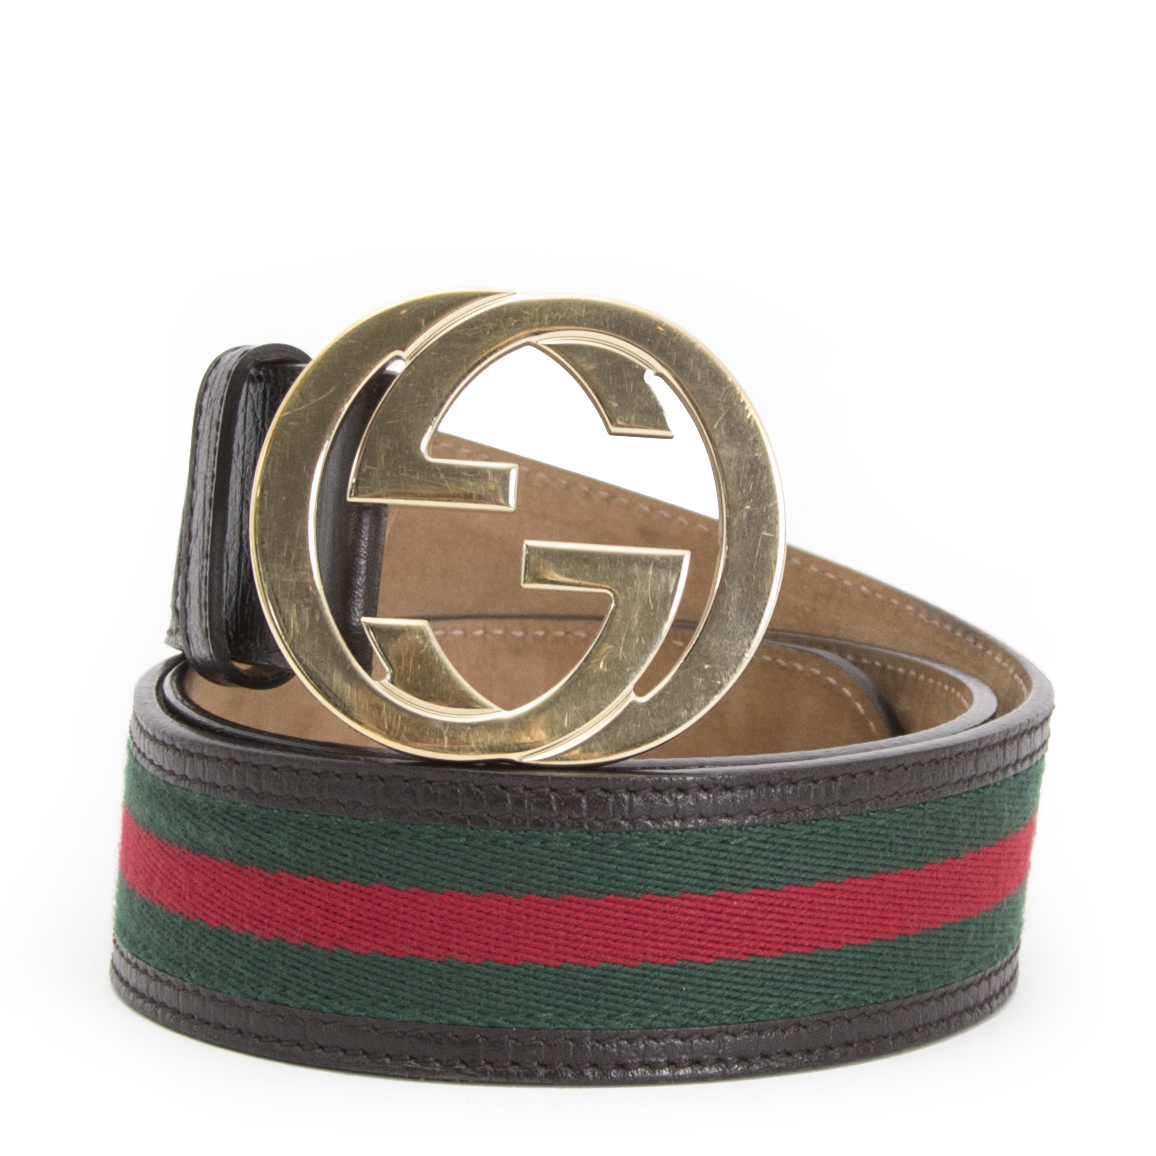 Gucci Red Green Belt Size 85 | lupon.gov.ph